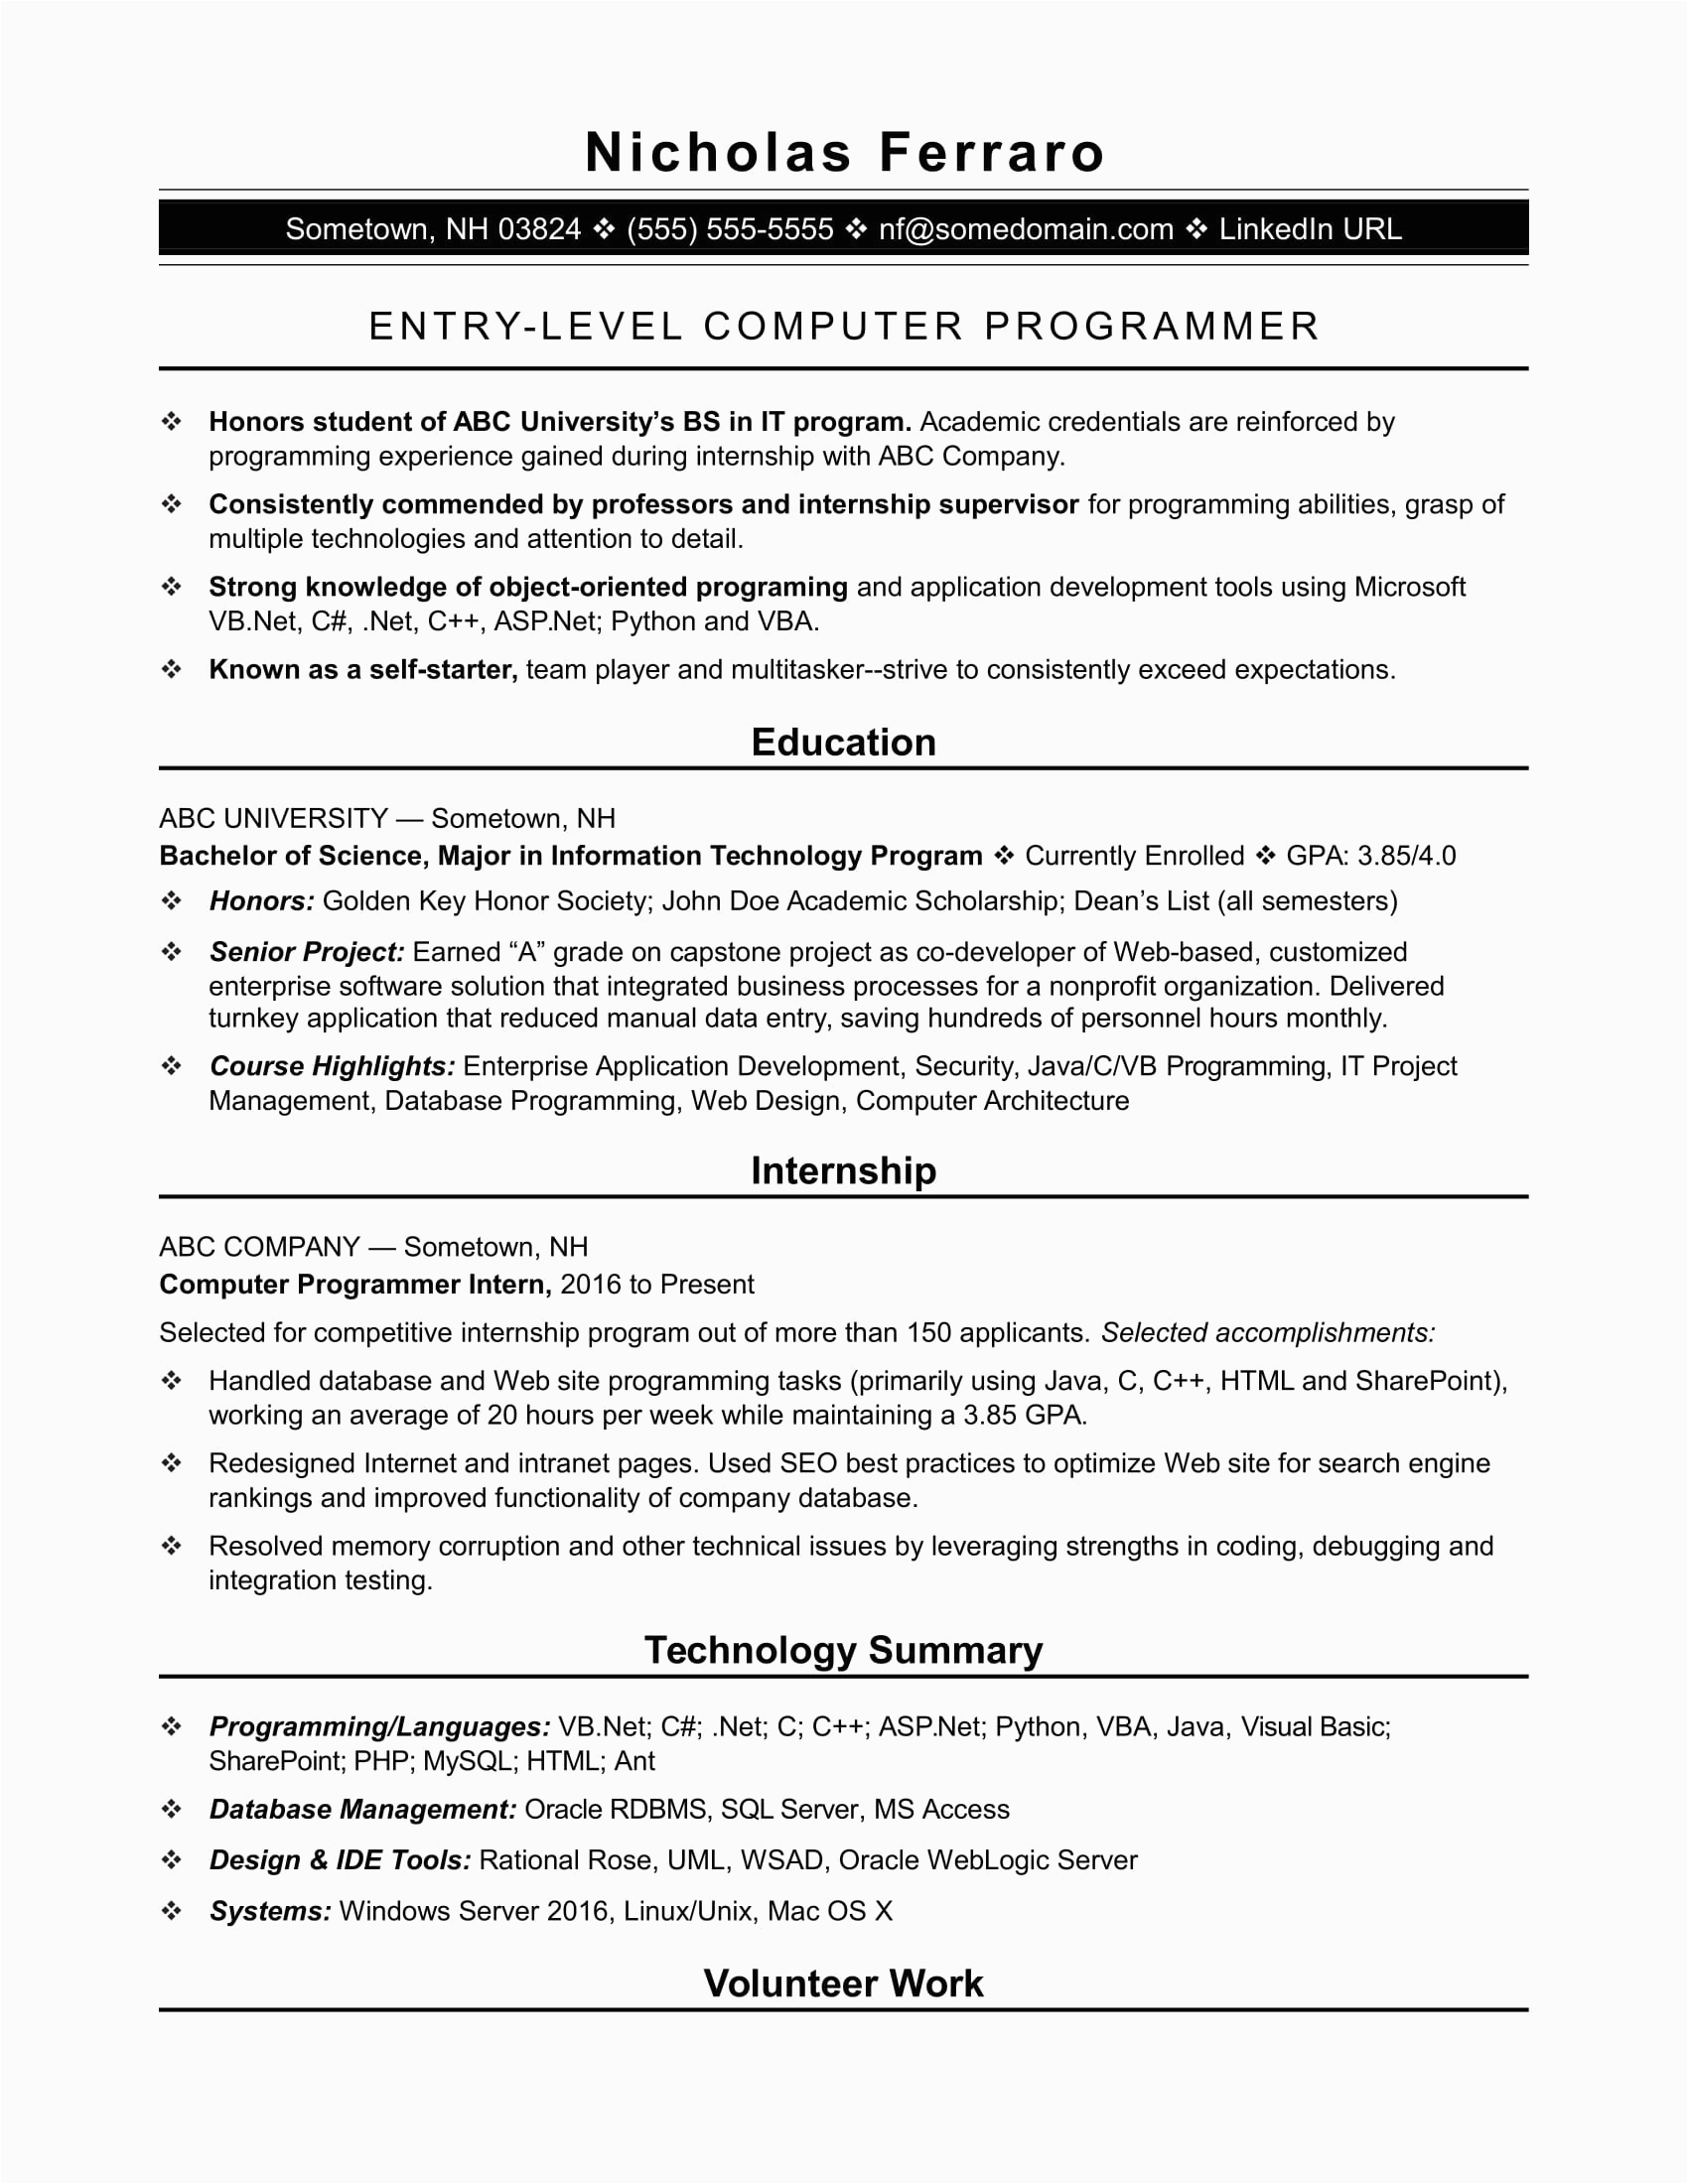 Sample Computer Science Resume Entry Level Sample Resume for An Entry Level Puter Programmer